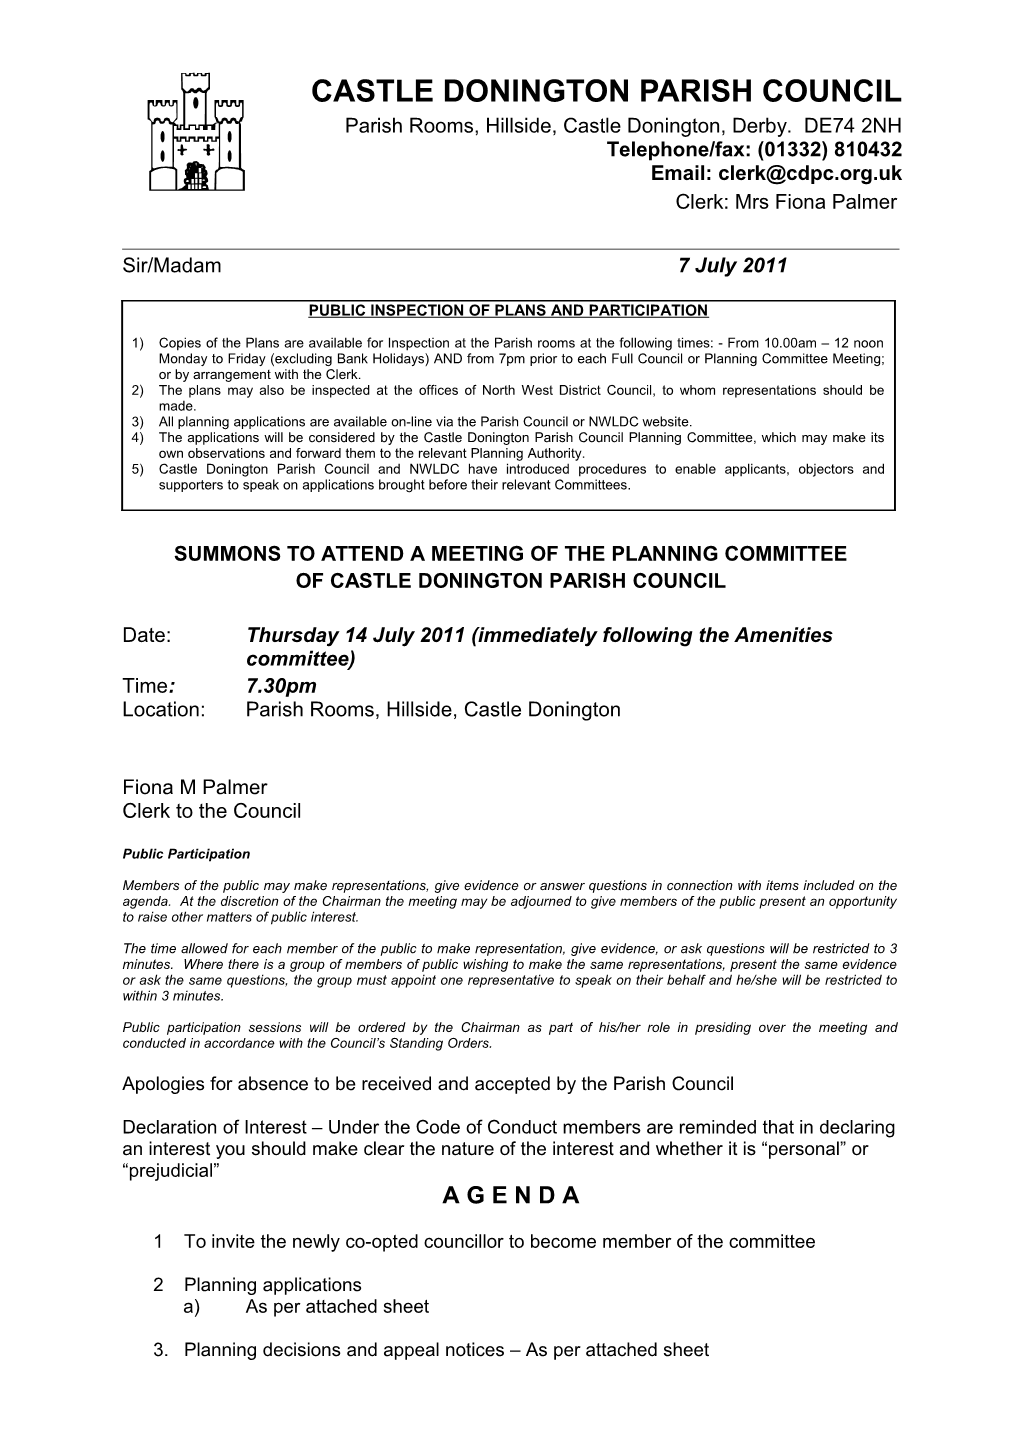 Summons to Attend a Meeting of the Planning Committee